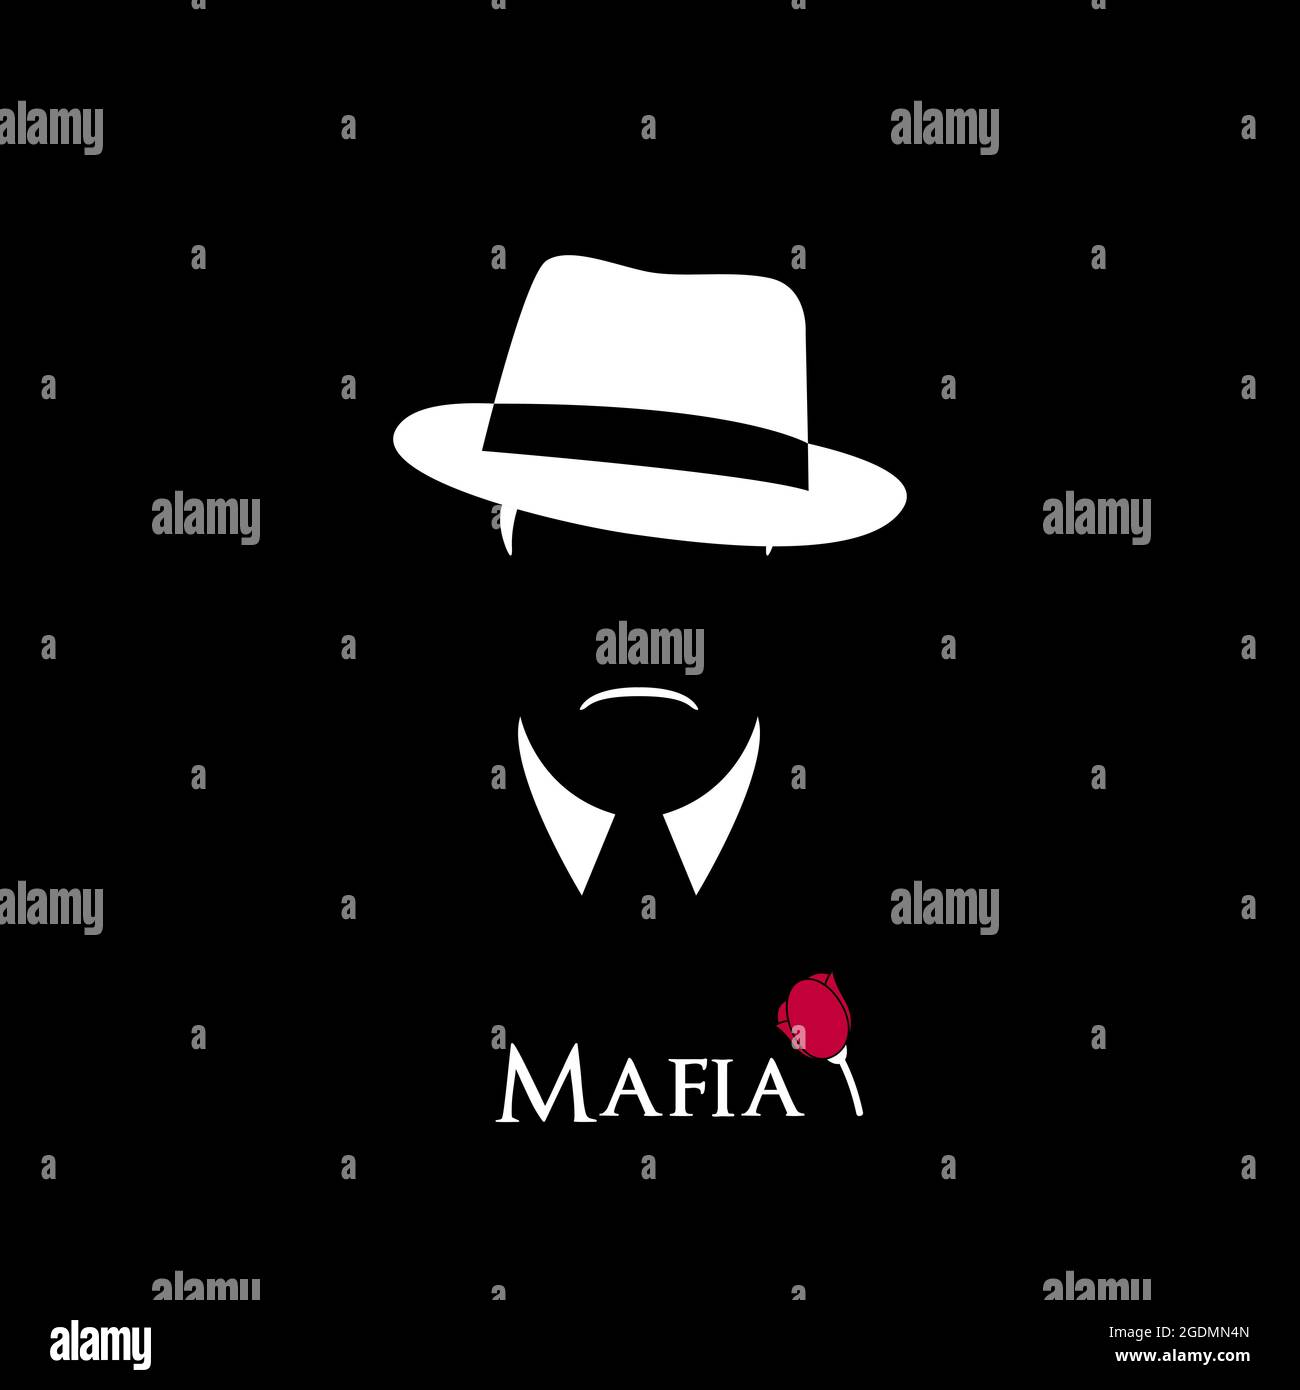 Italian Mafioso. Illustration Man with a hat, mustache and collar. Black and white vector illustration. Stock Vector